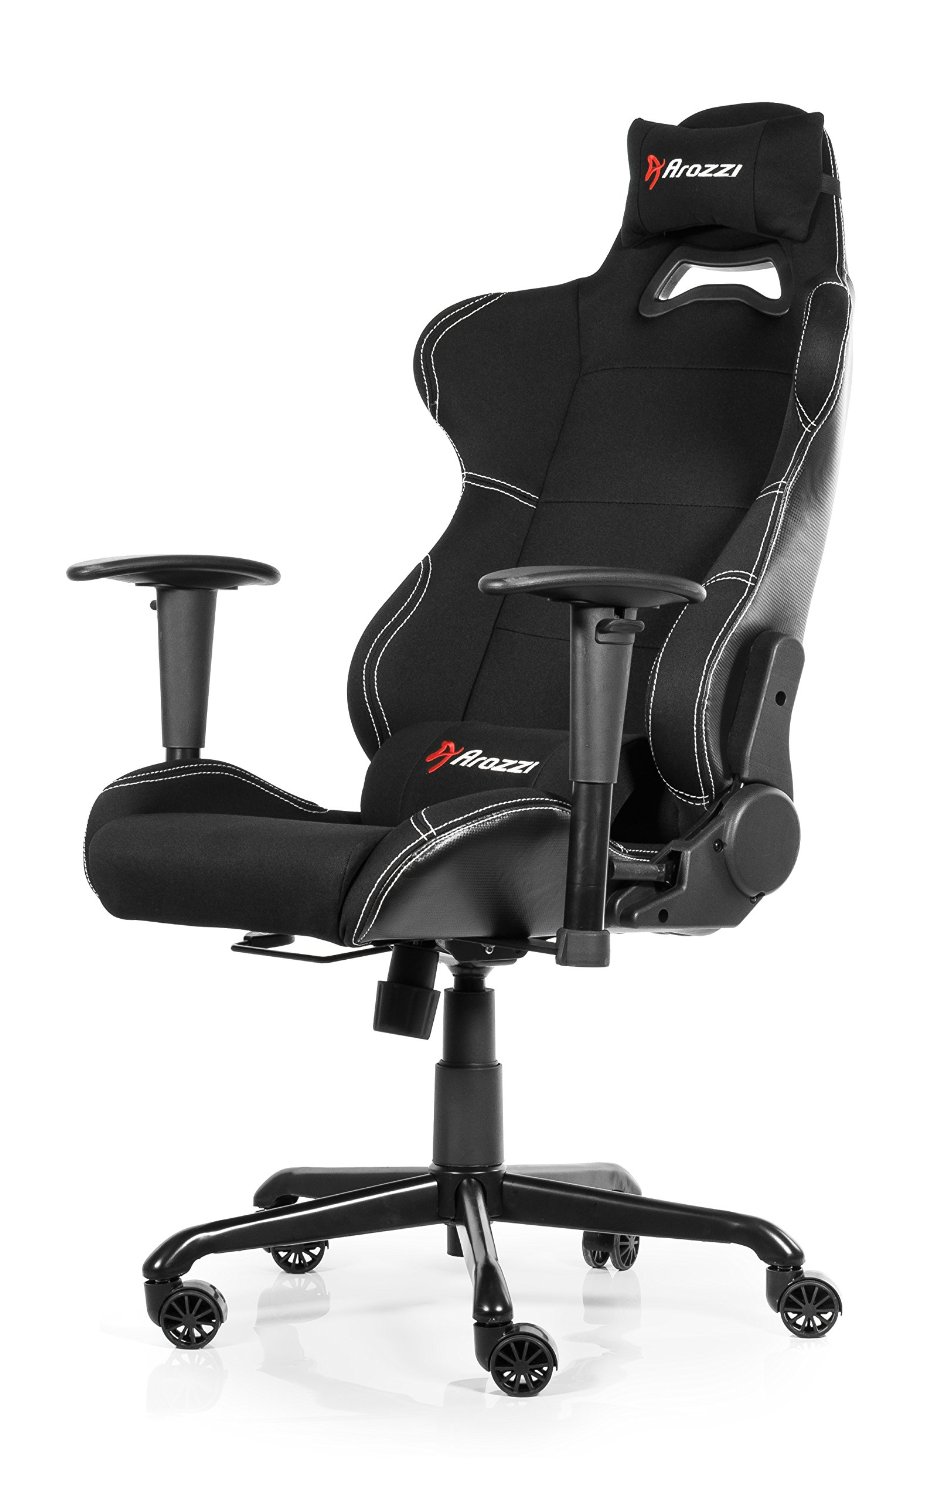 ergonomic Best Pc Gaming Chairs Under 200 for Streaming